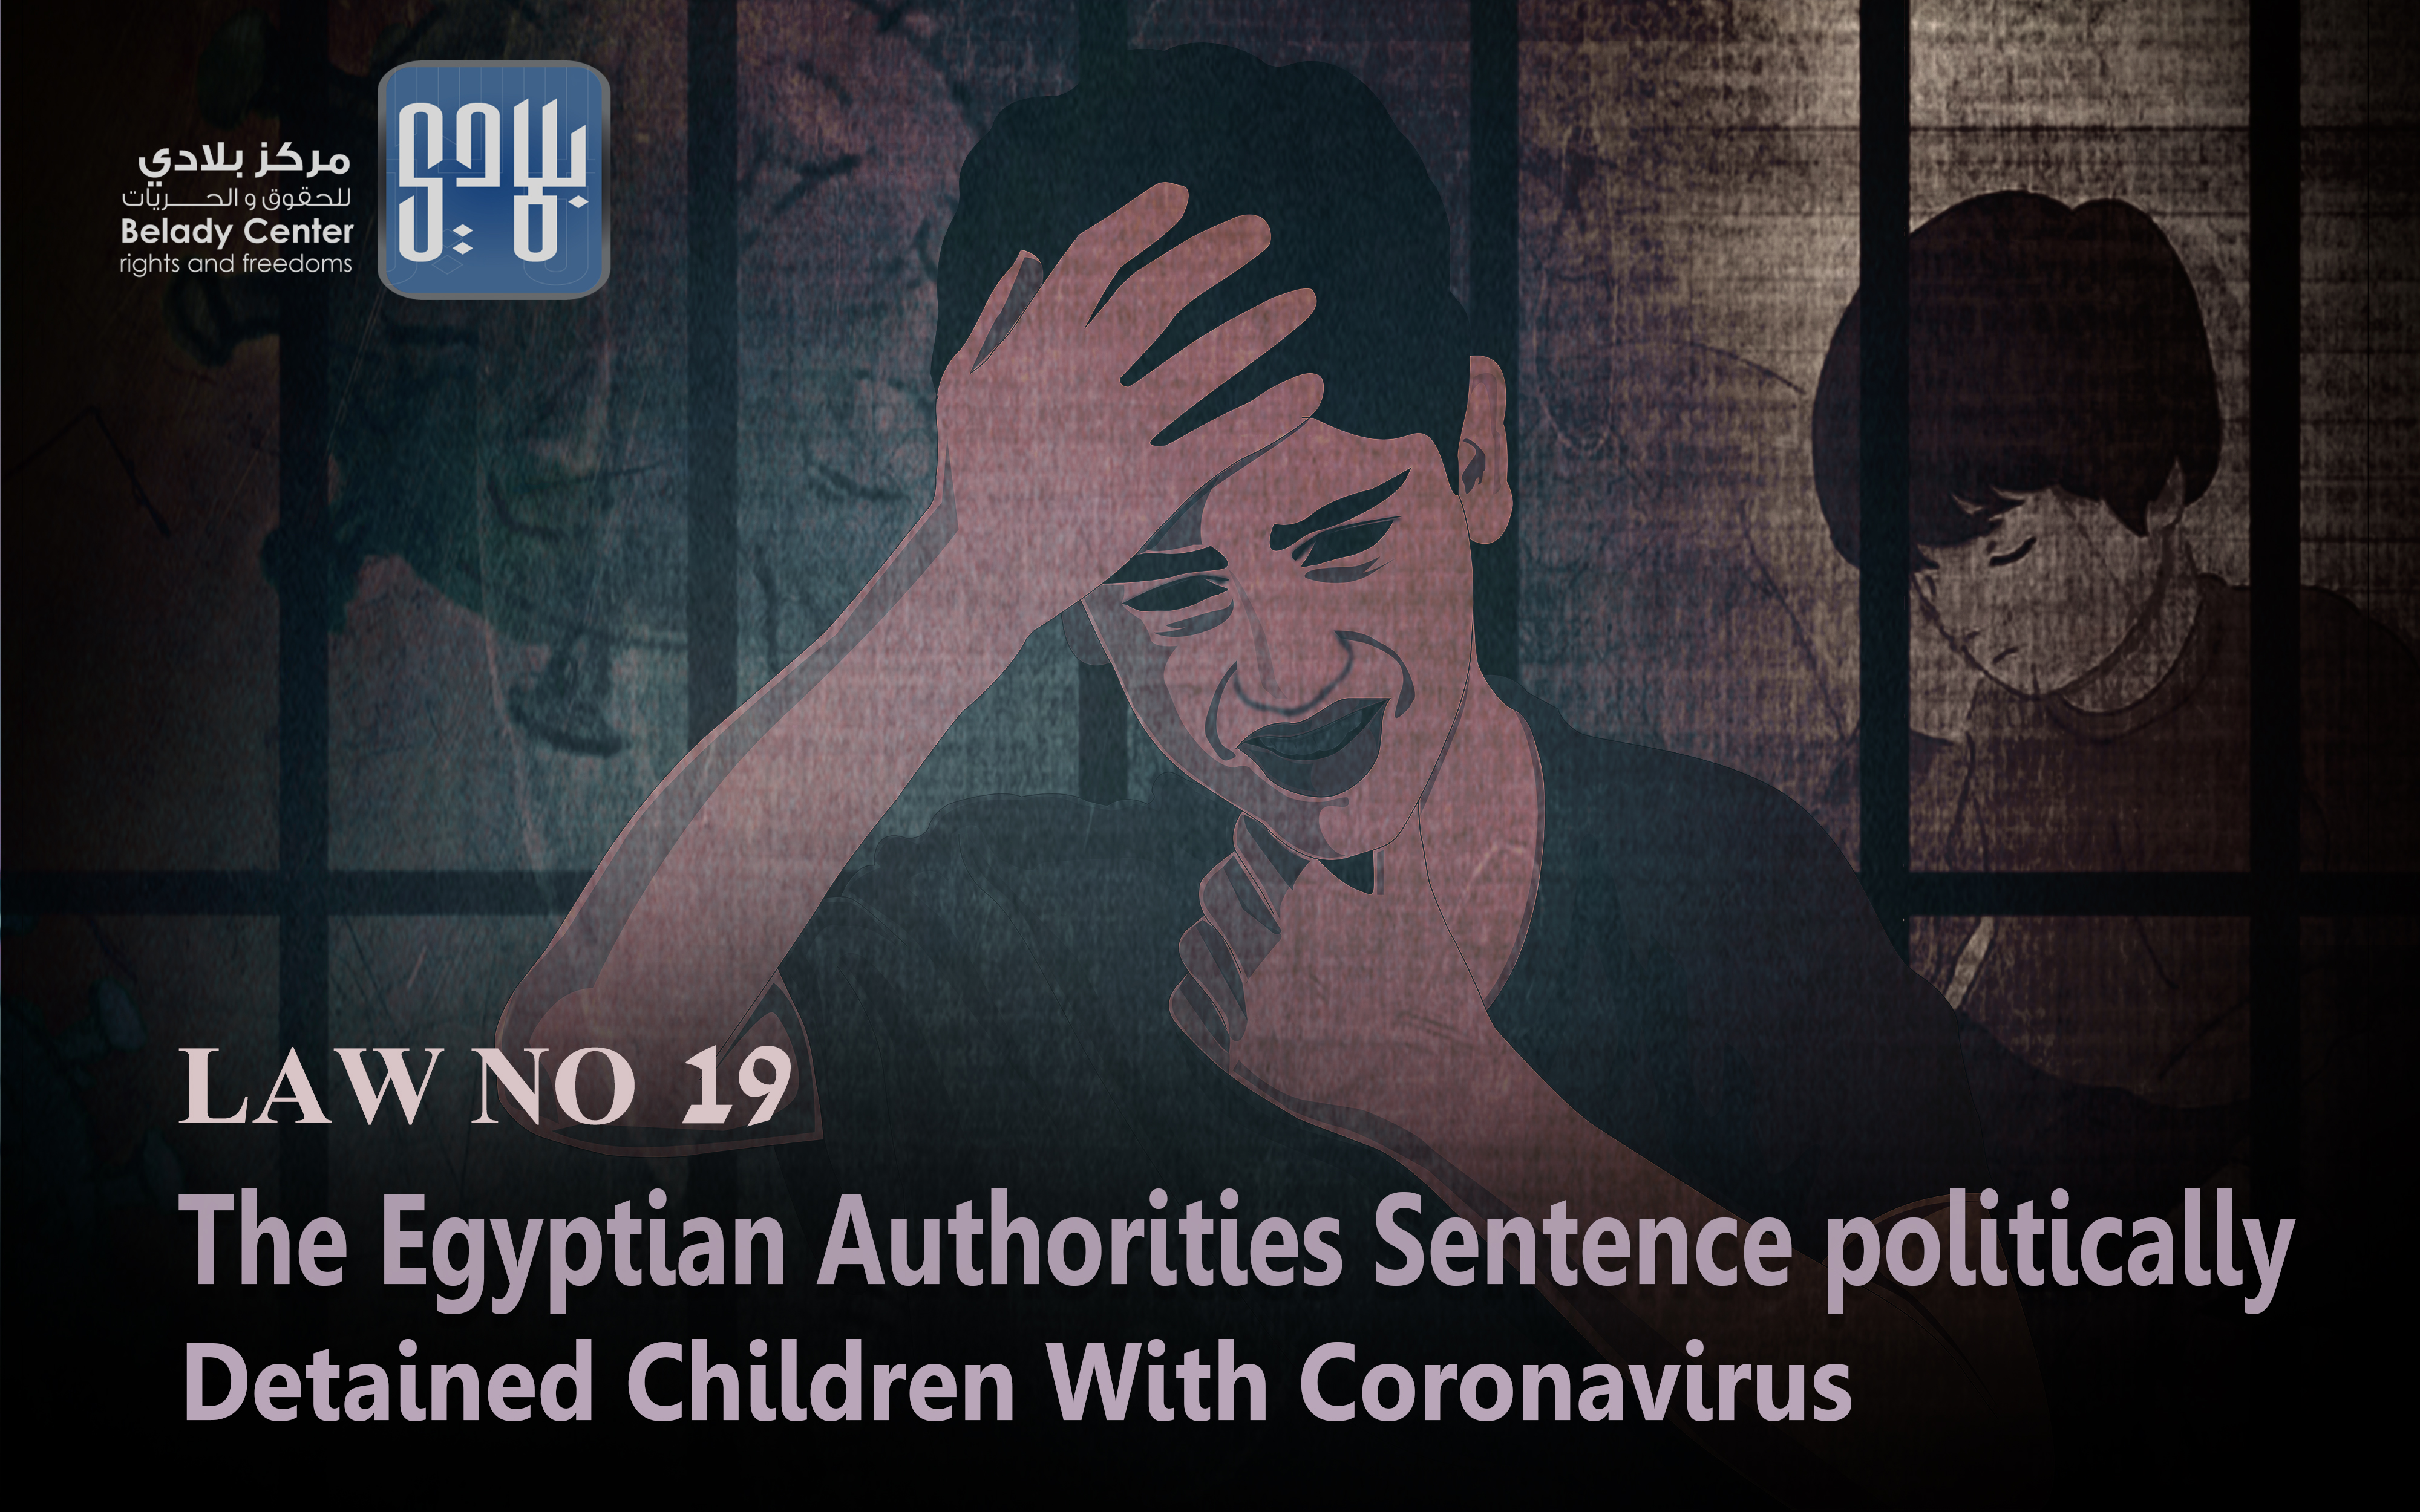 s with children detained politically sentence authorities Egyptian The: 19.No Law